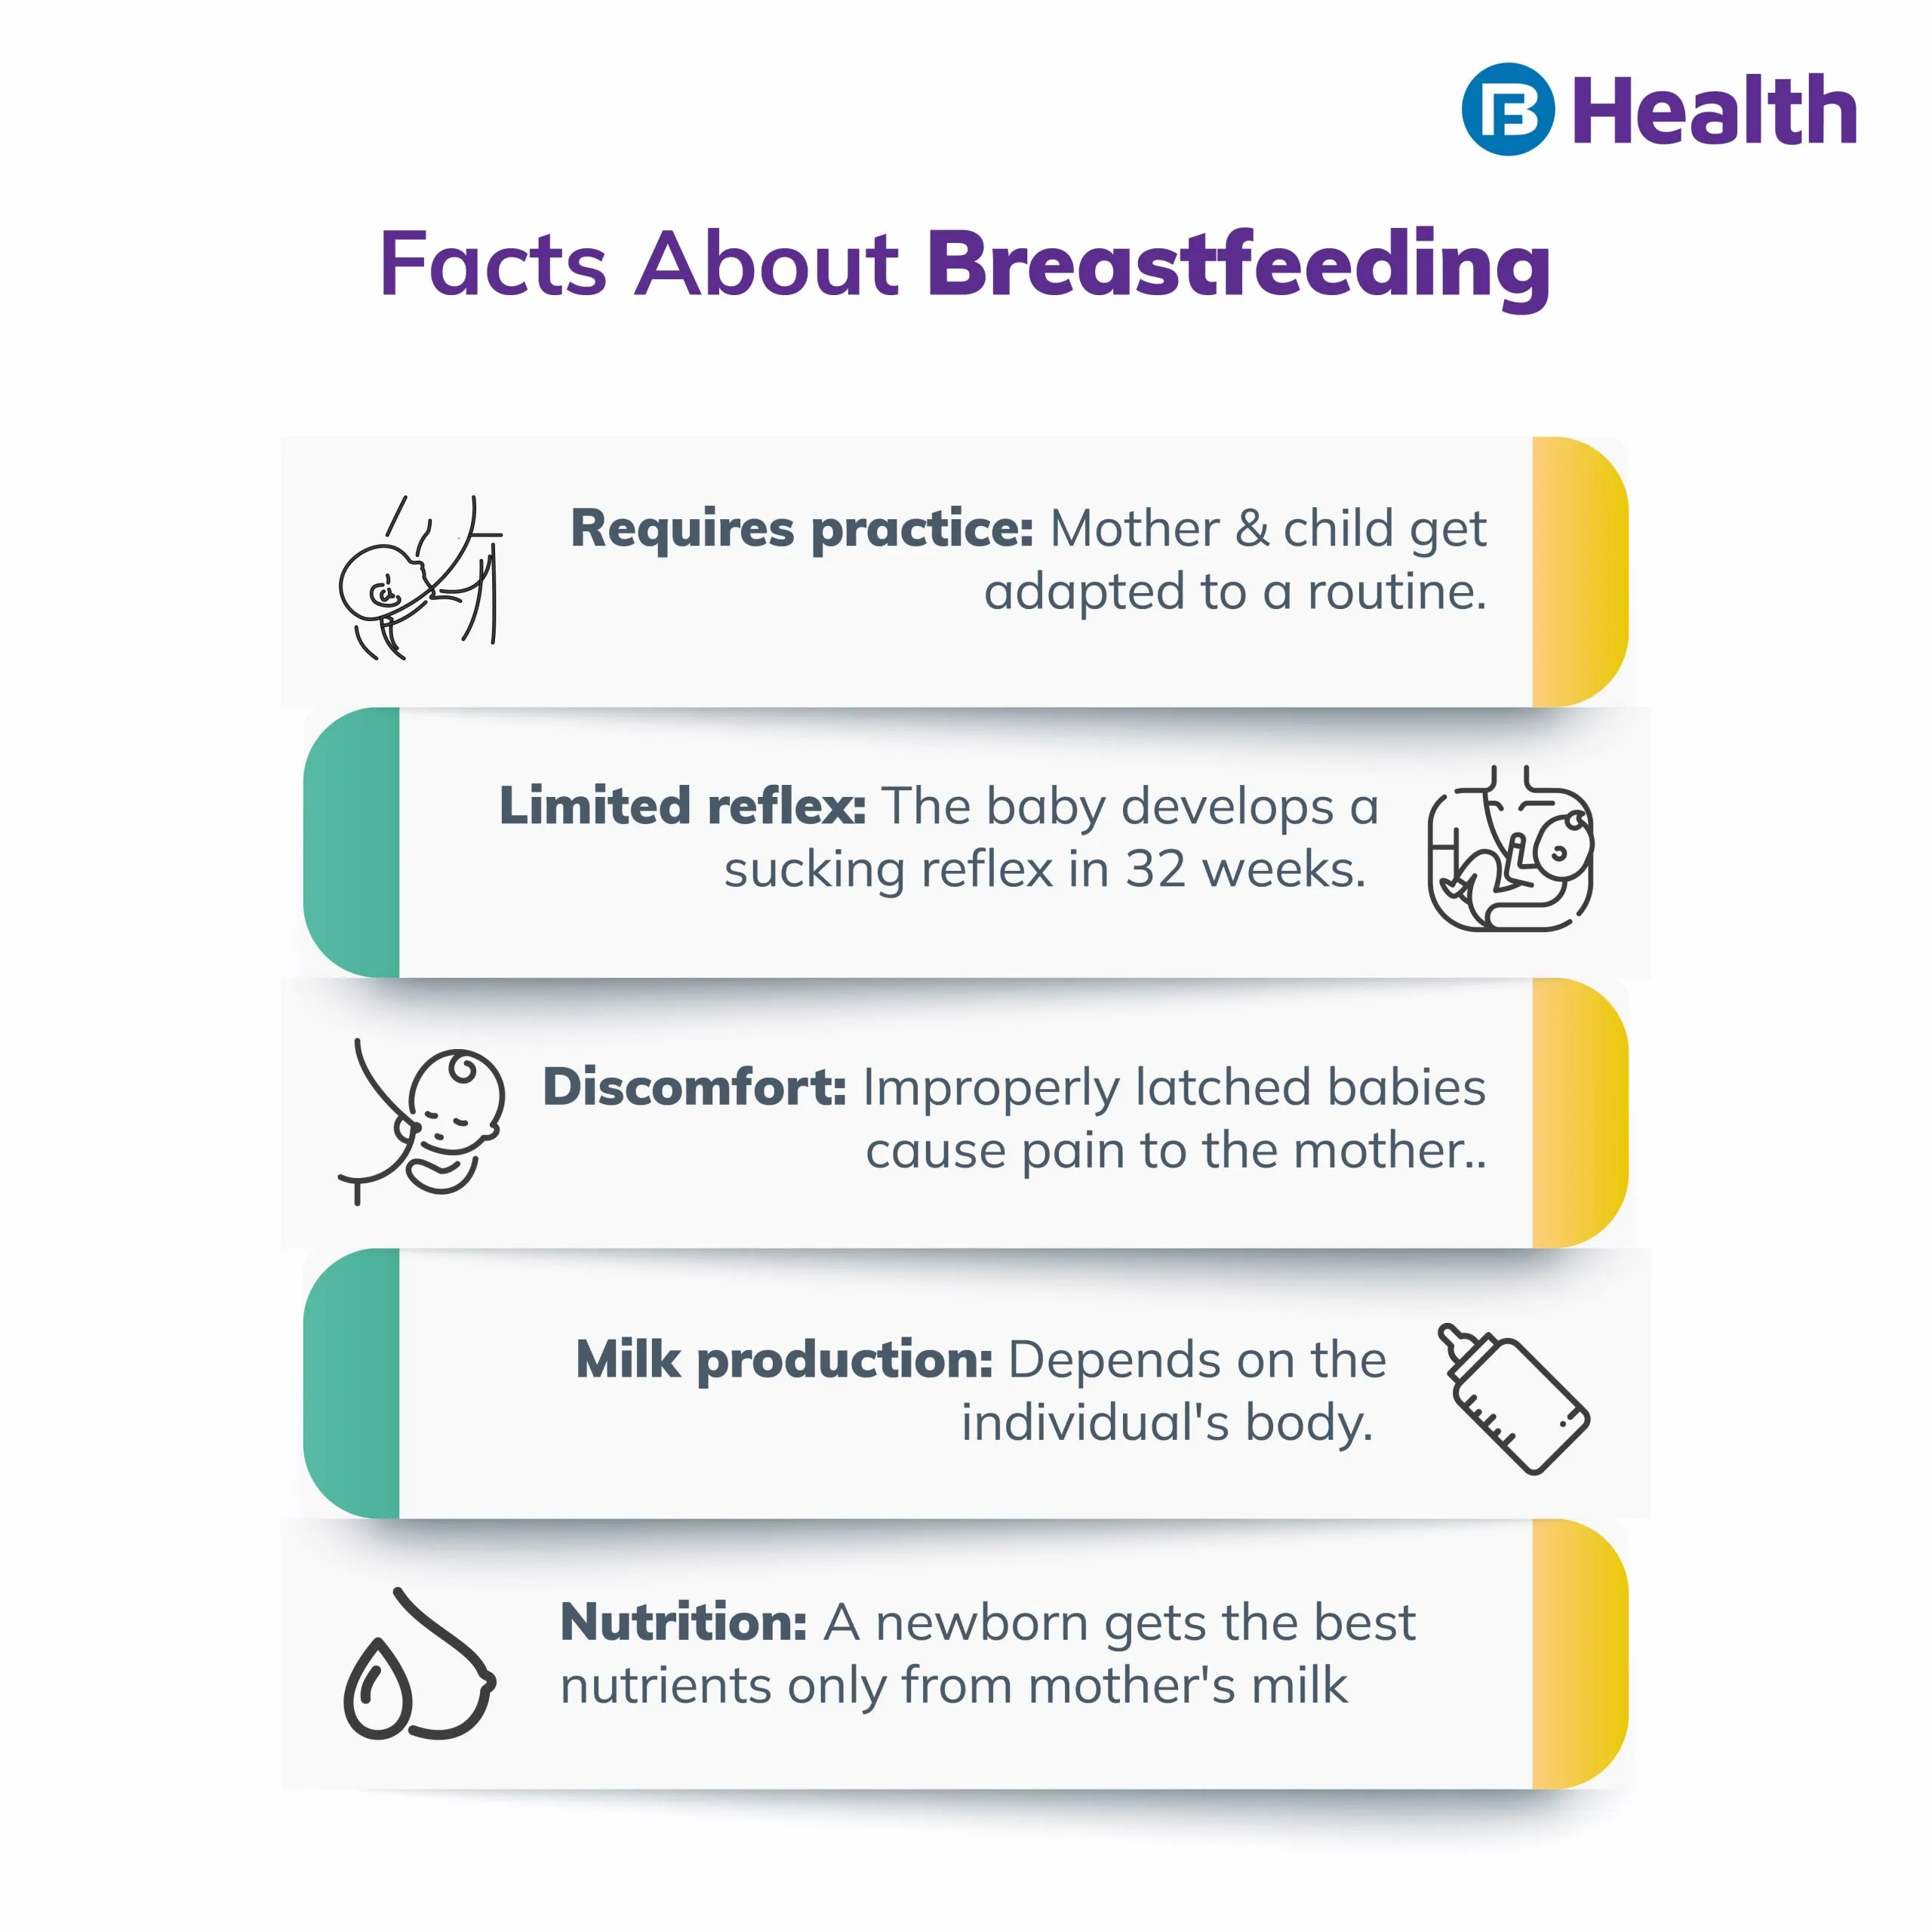 Facts about breastfeeding